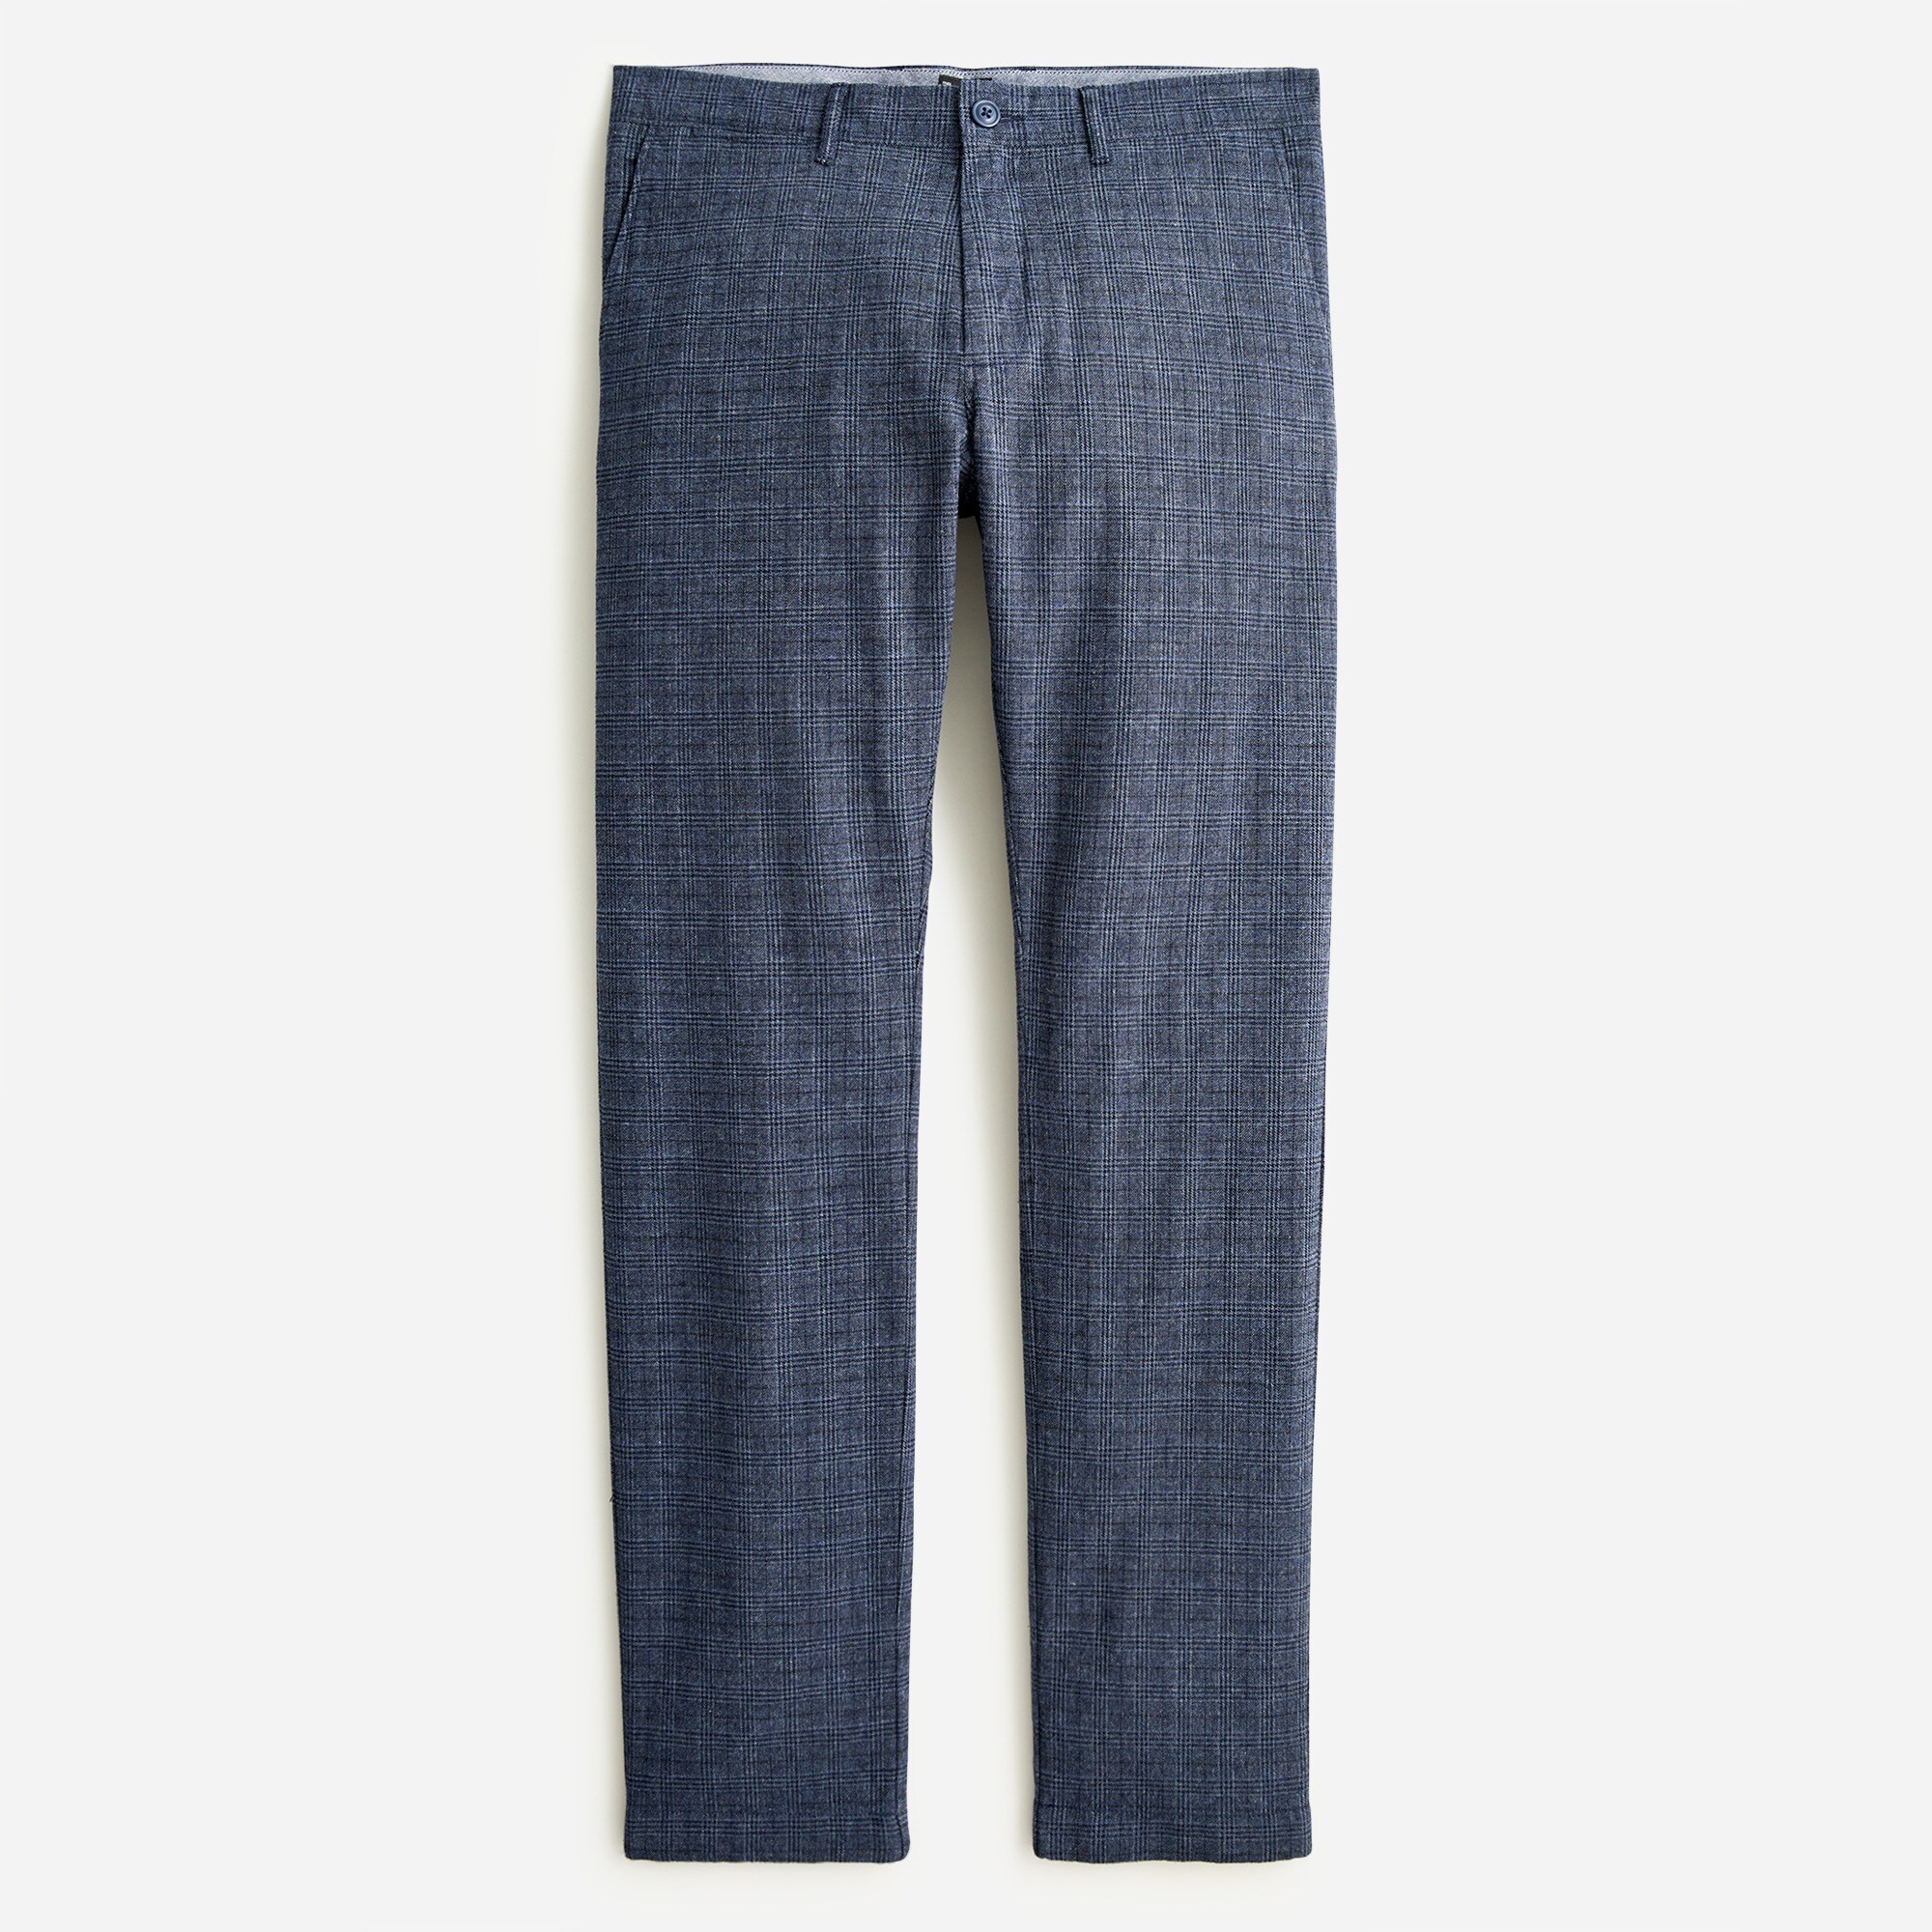  484 Slim-fit brushed twill pant in plaid